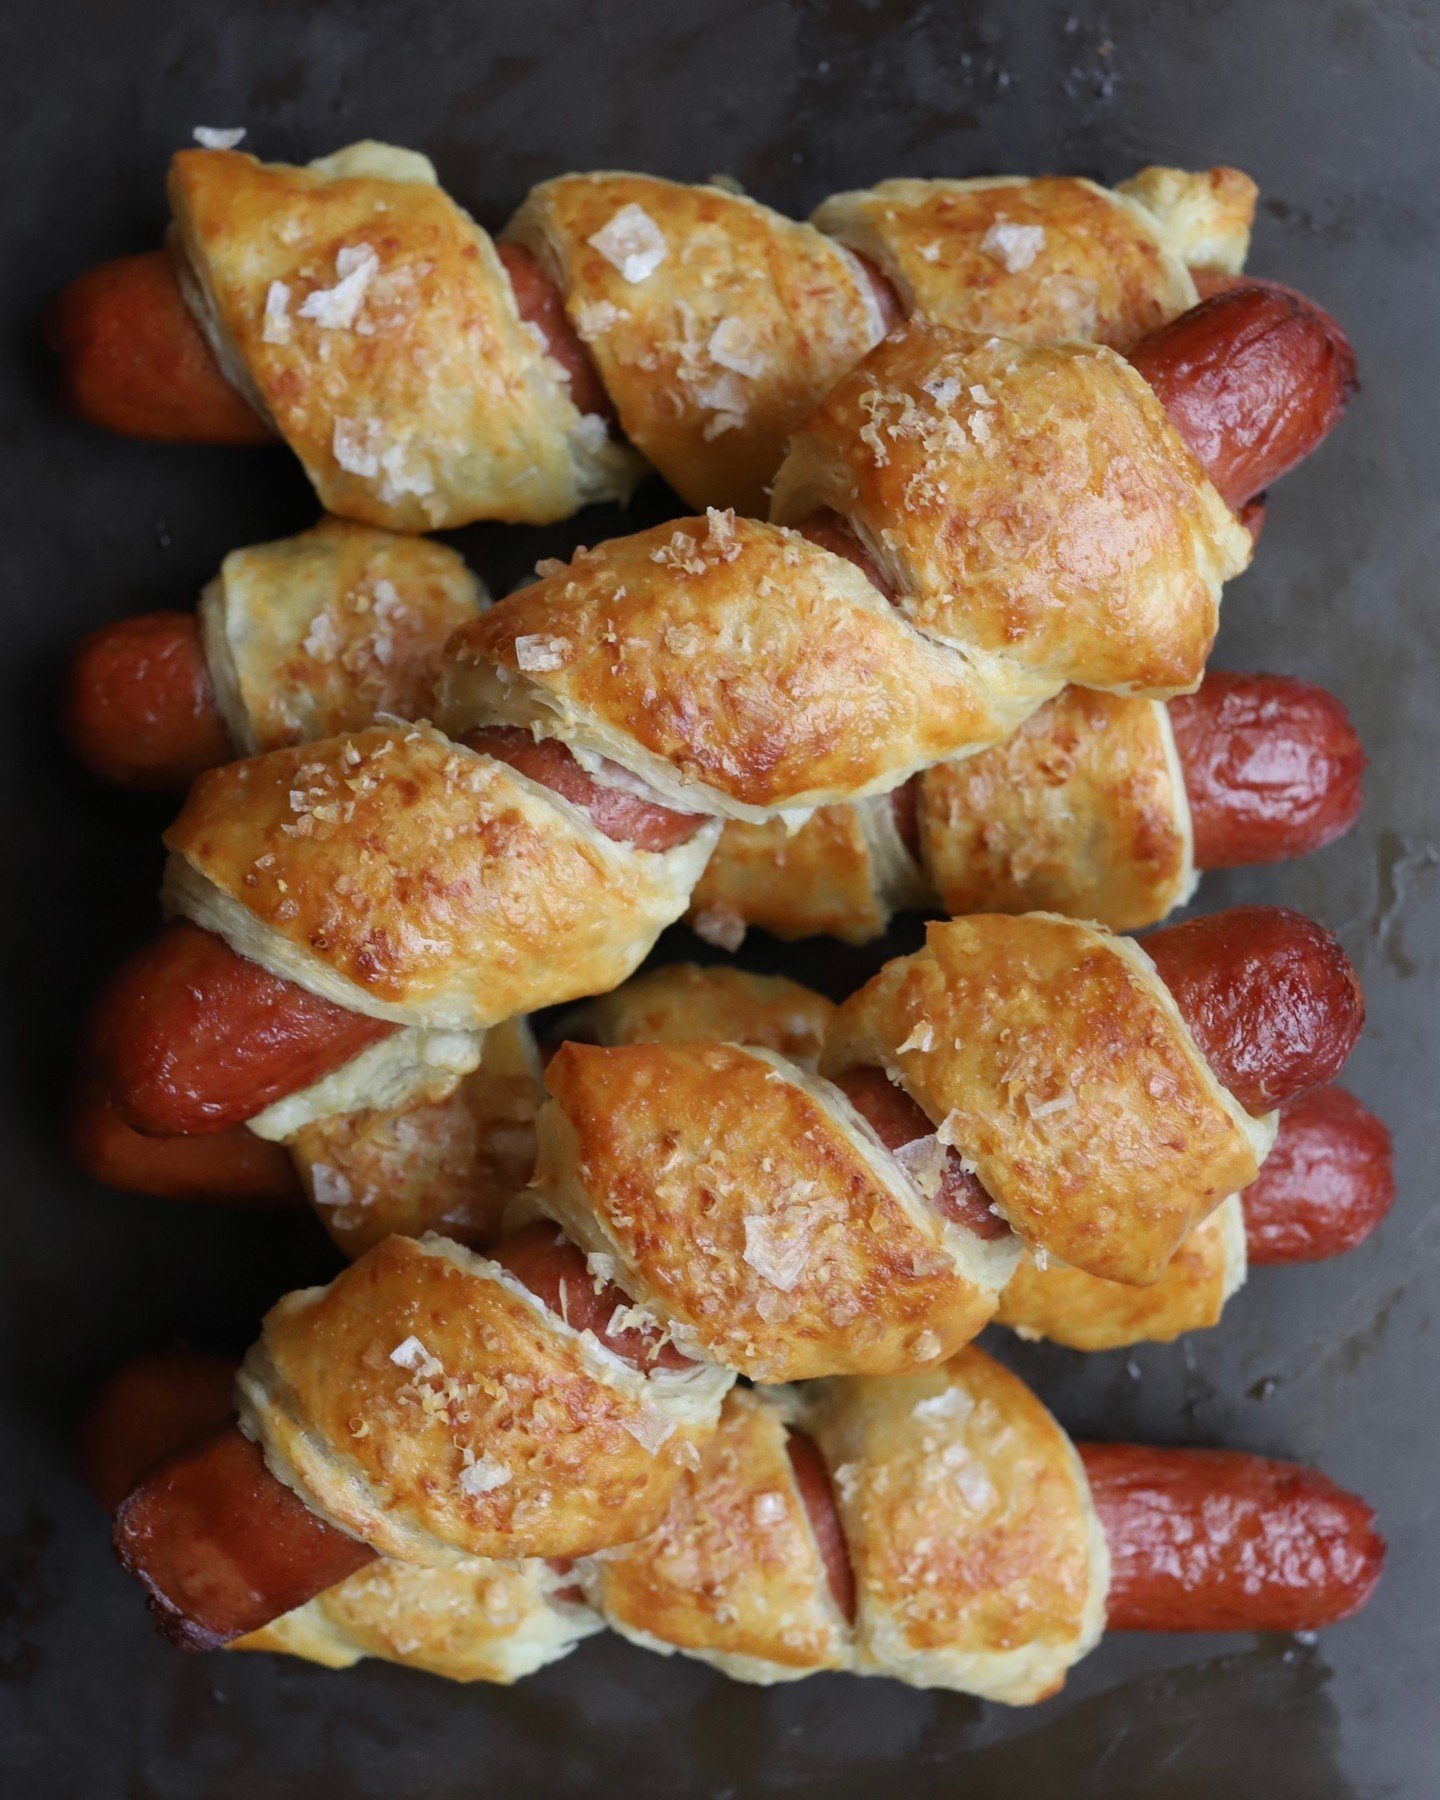 Hot diggity dawg!!! Brilliant idea. Double team it. Use your grill and oven to make this weekend epic! These puff pastry wrapped hot dogs get baked right in the oven leaving your grill wide open for burgers and corn.
⁠
🏈🌭 CLICK THE LINK IN MY BIO f